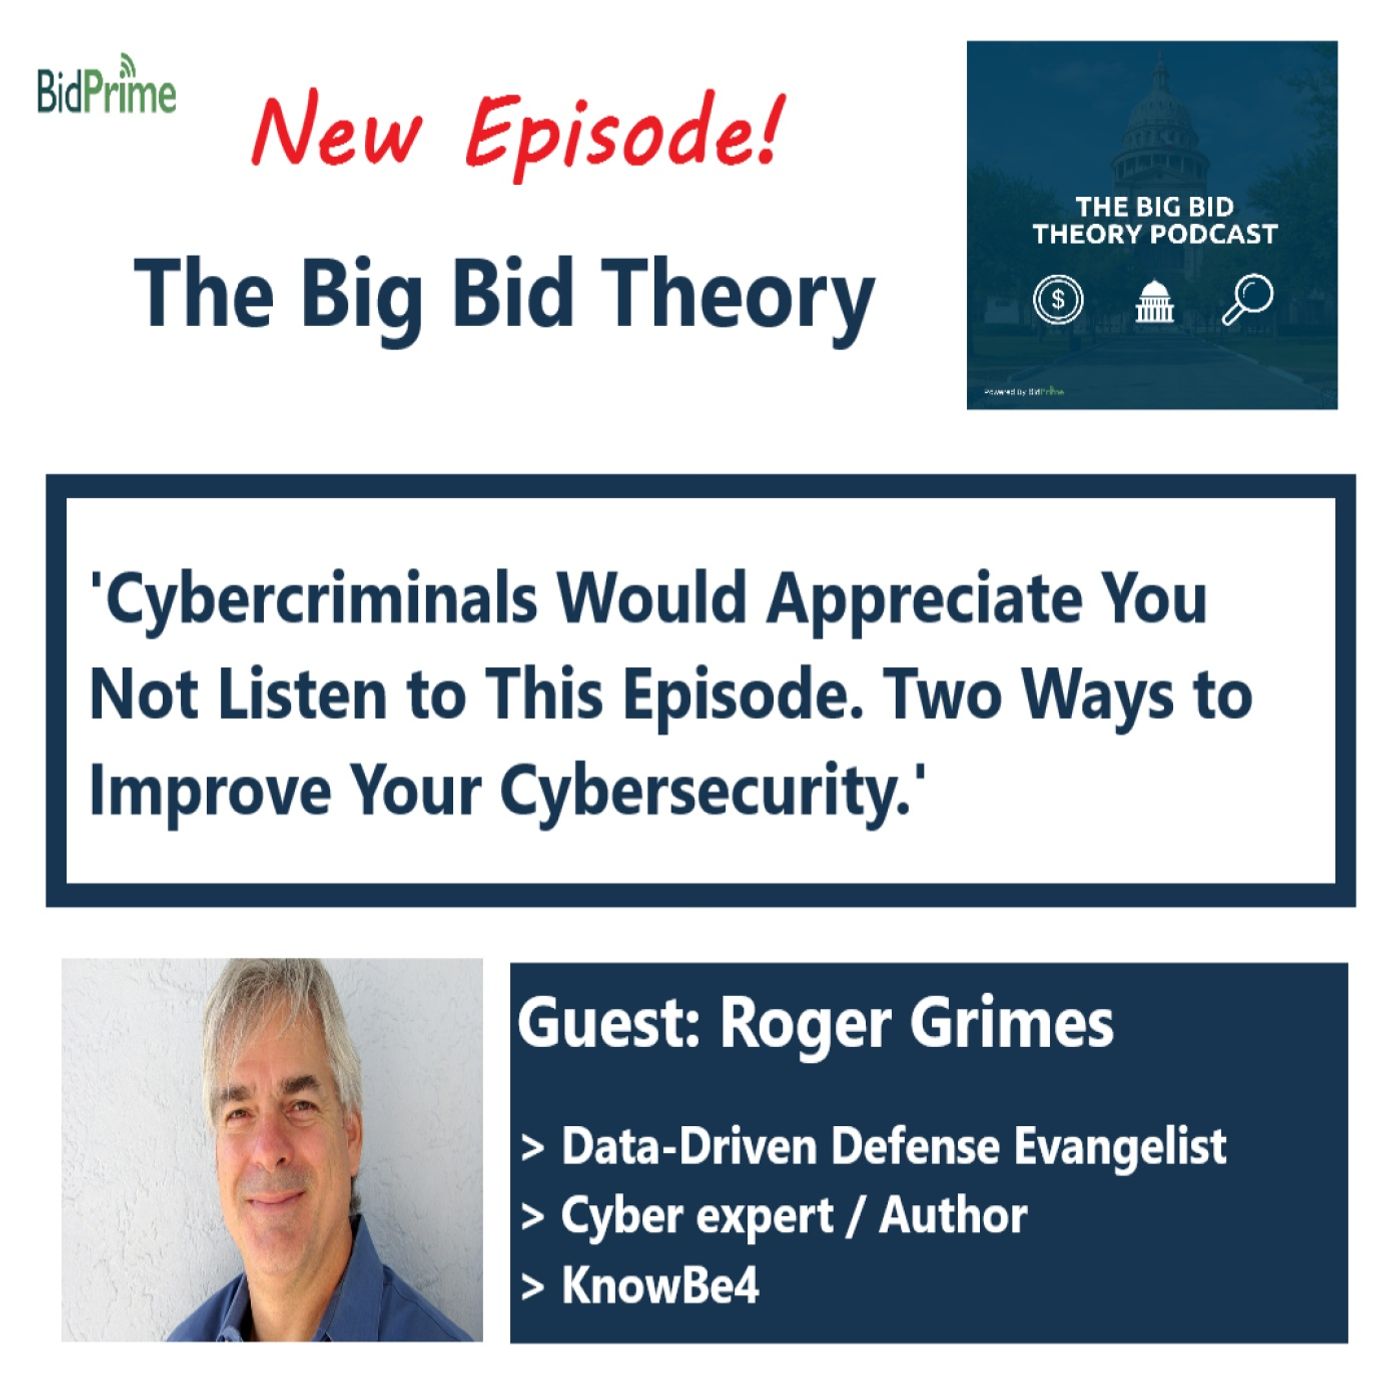 Cybercriminals Would Appreciate You Not Listen to This Episode. Two Ways to Improve Your Cybersecurity.